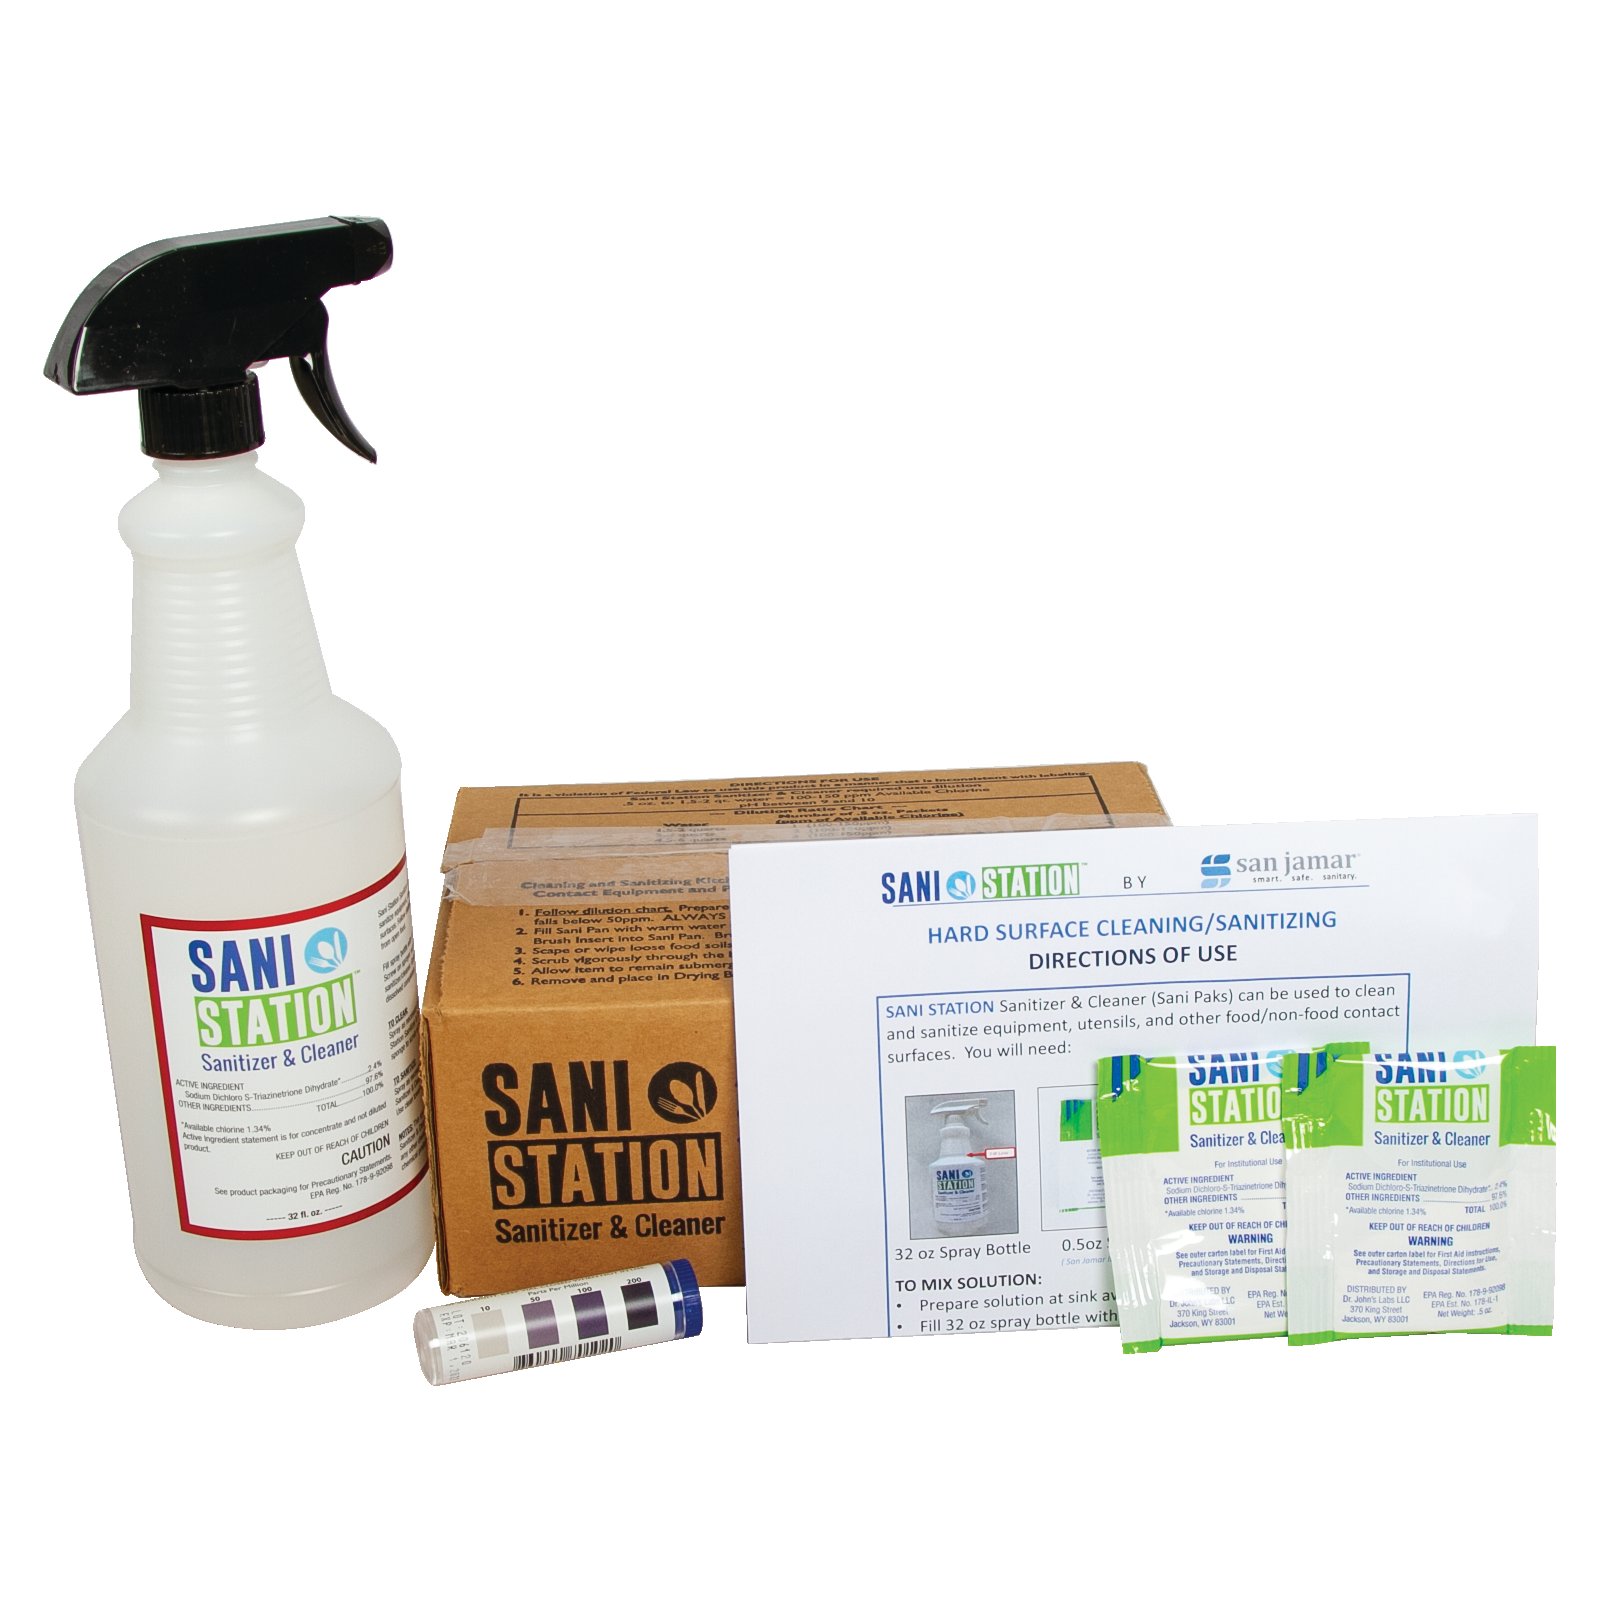 The Sani Station Hard Surface Cleaning Kit